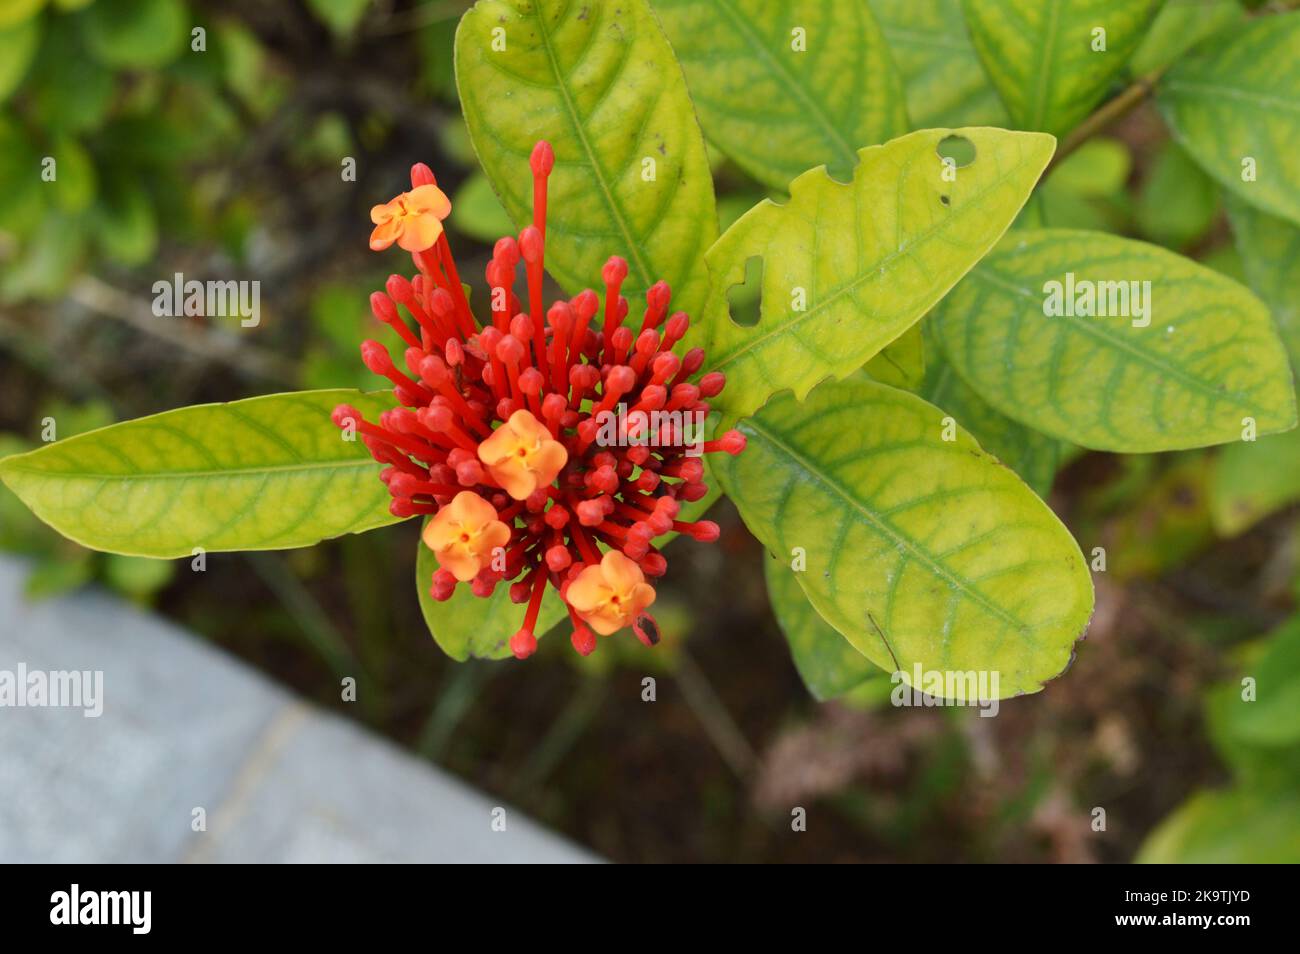 Red Iroxa blossom in early stage Stock Photo